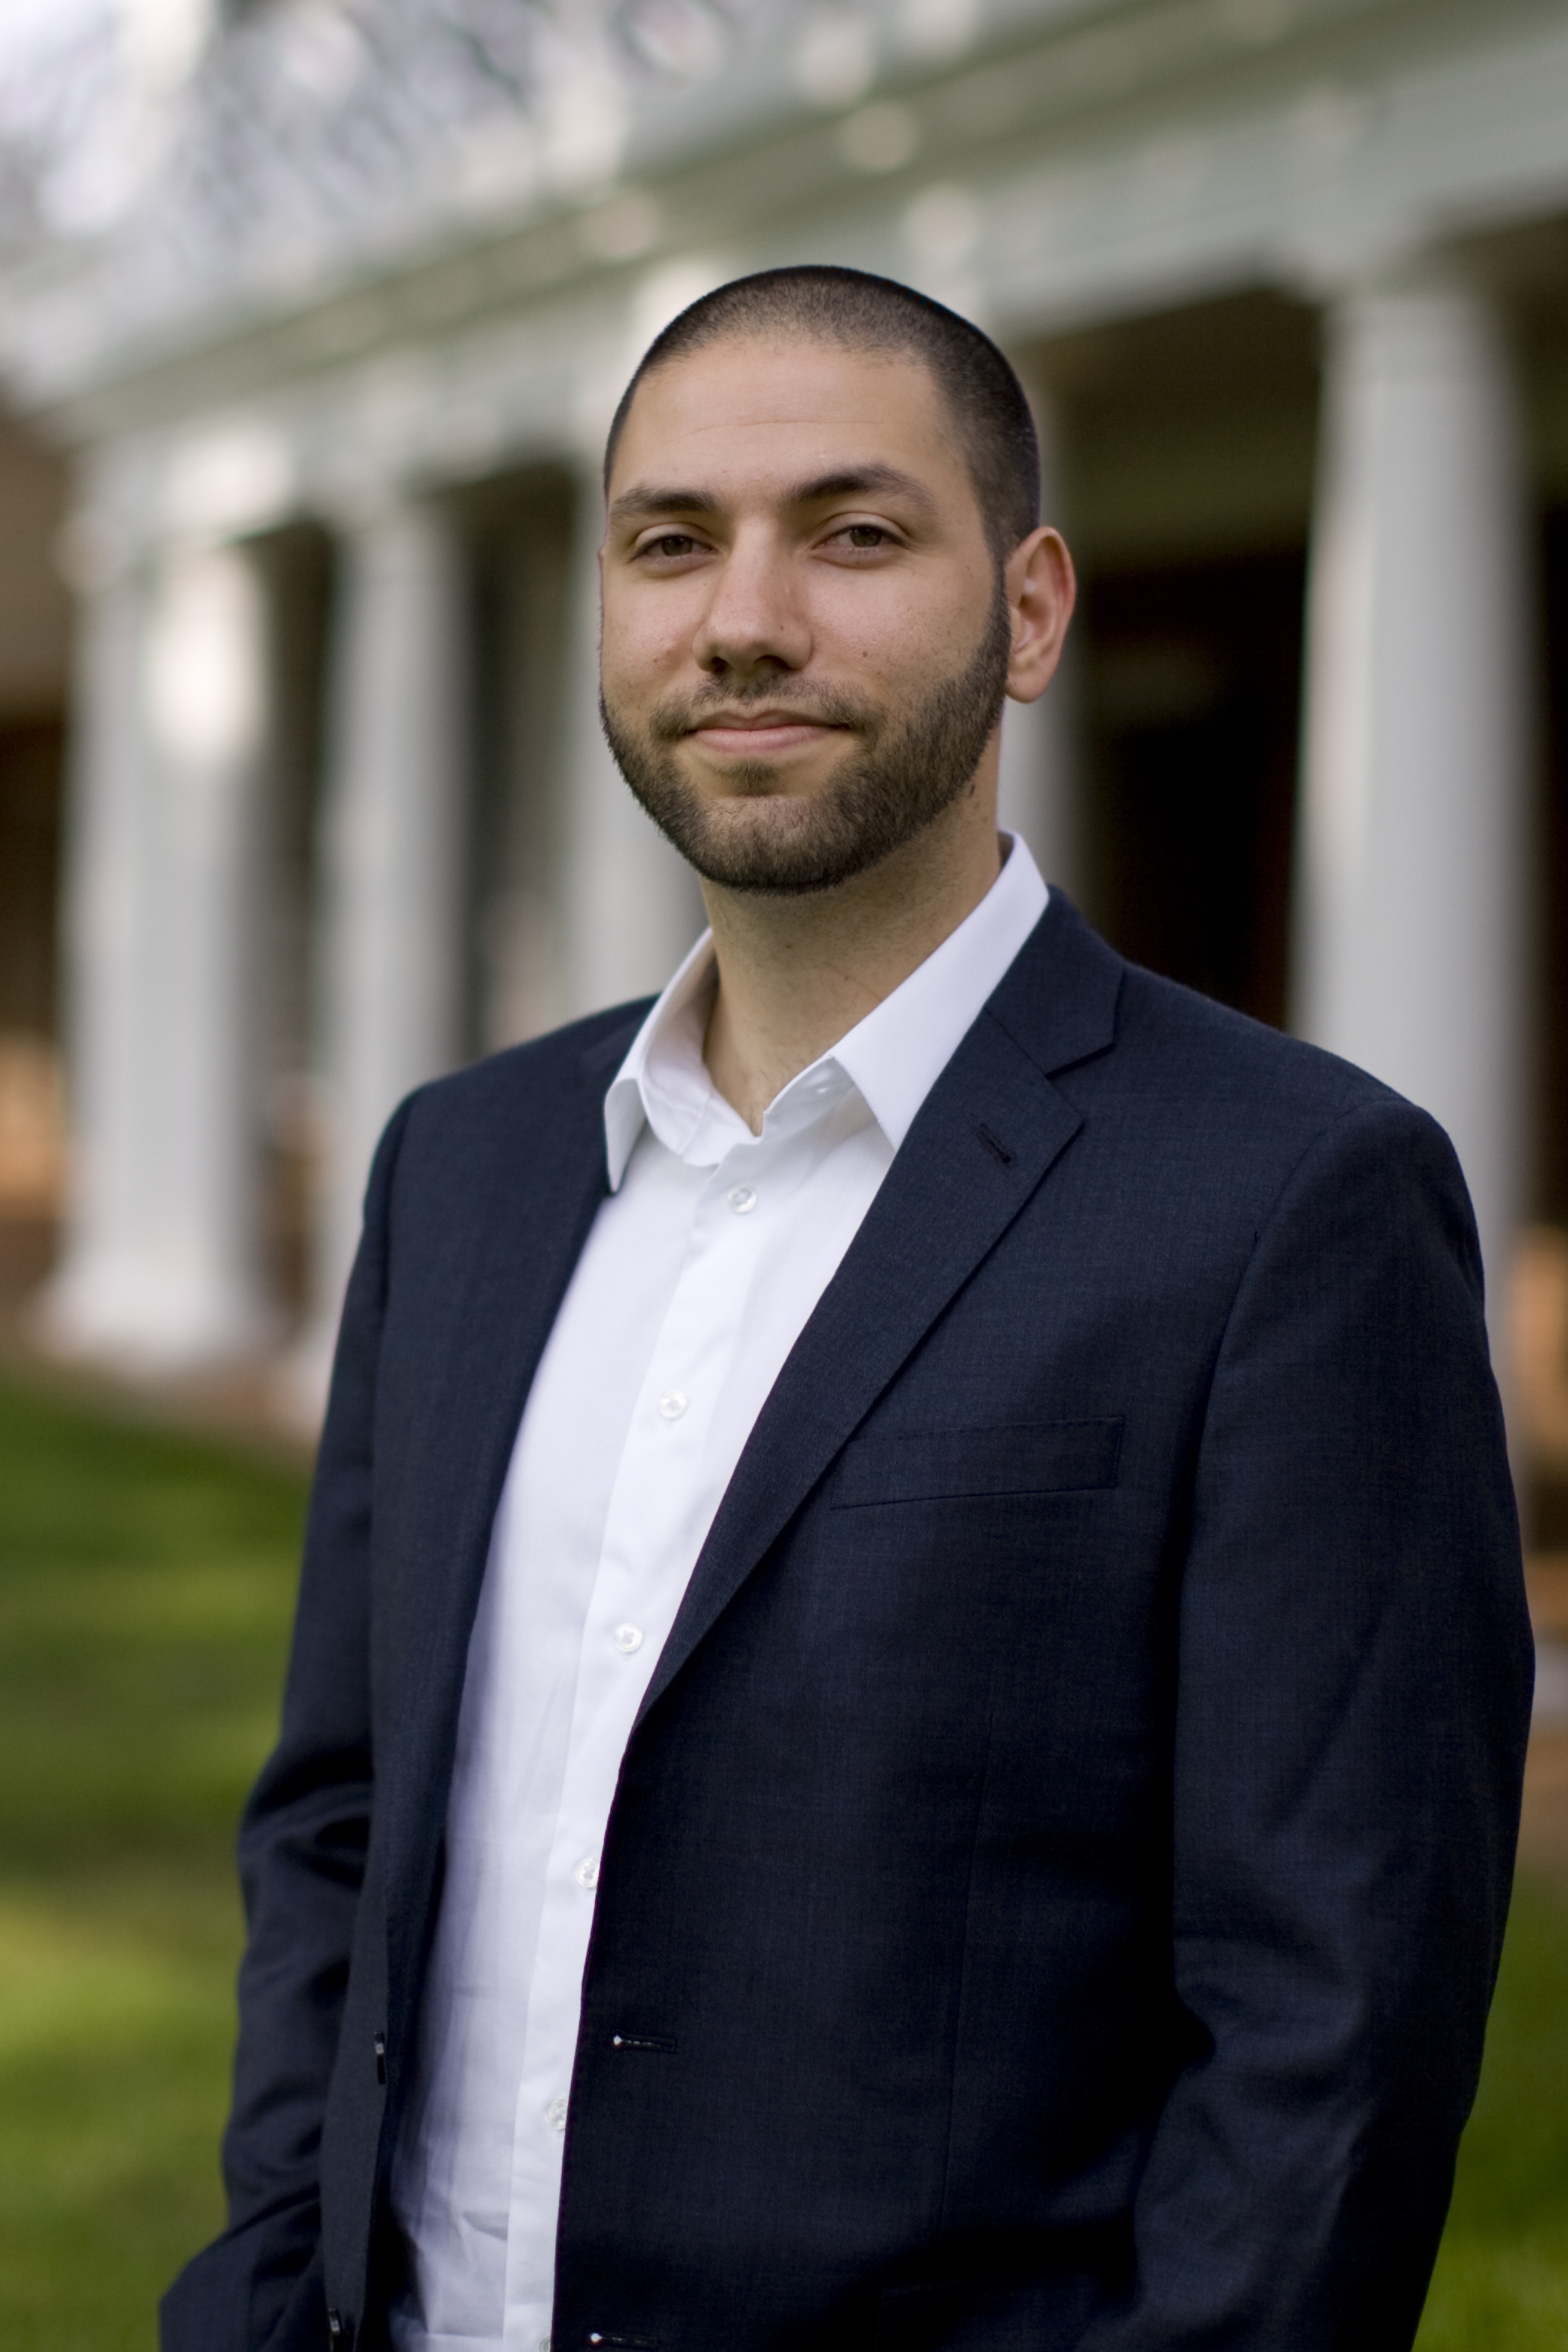 Assistant professor Benjamin Converse studies social psychology and the psychology of judgment and decision-making.